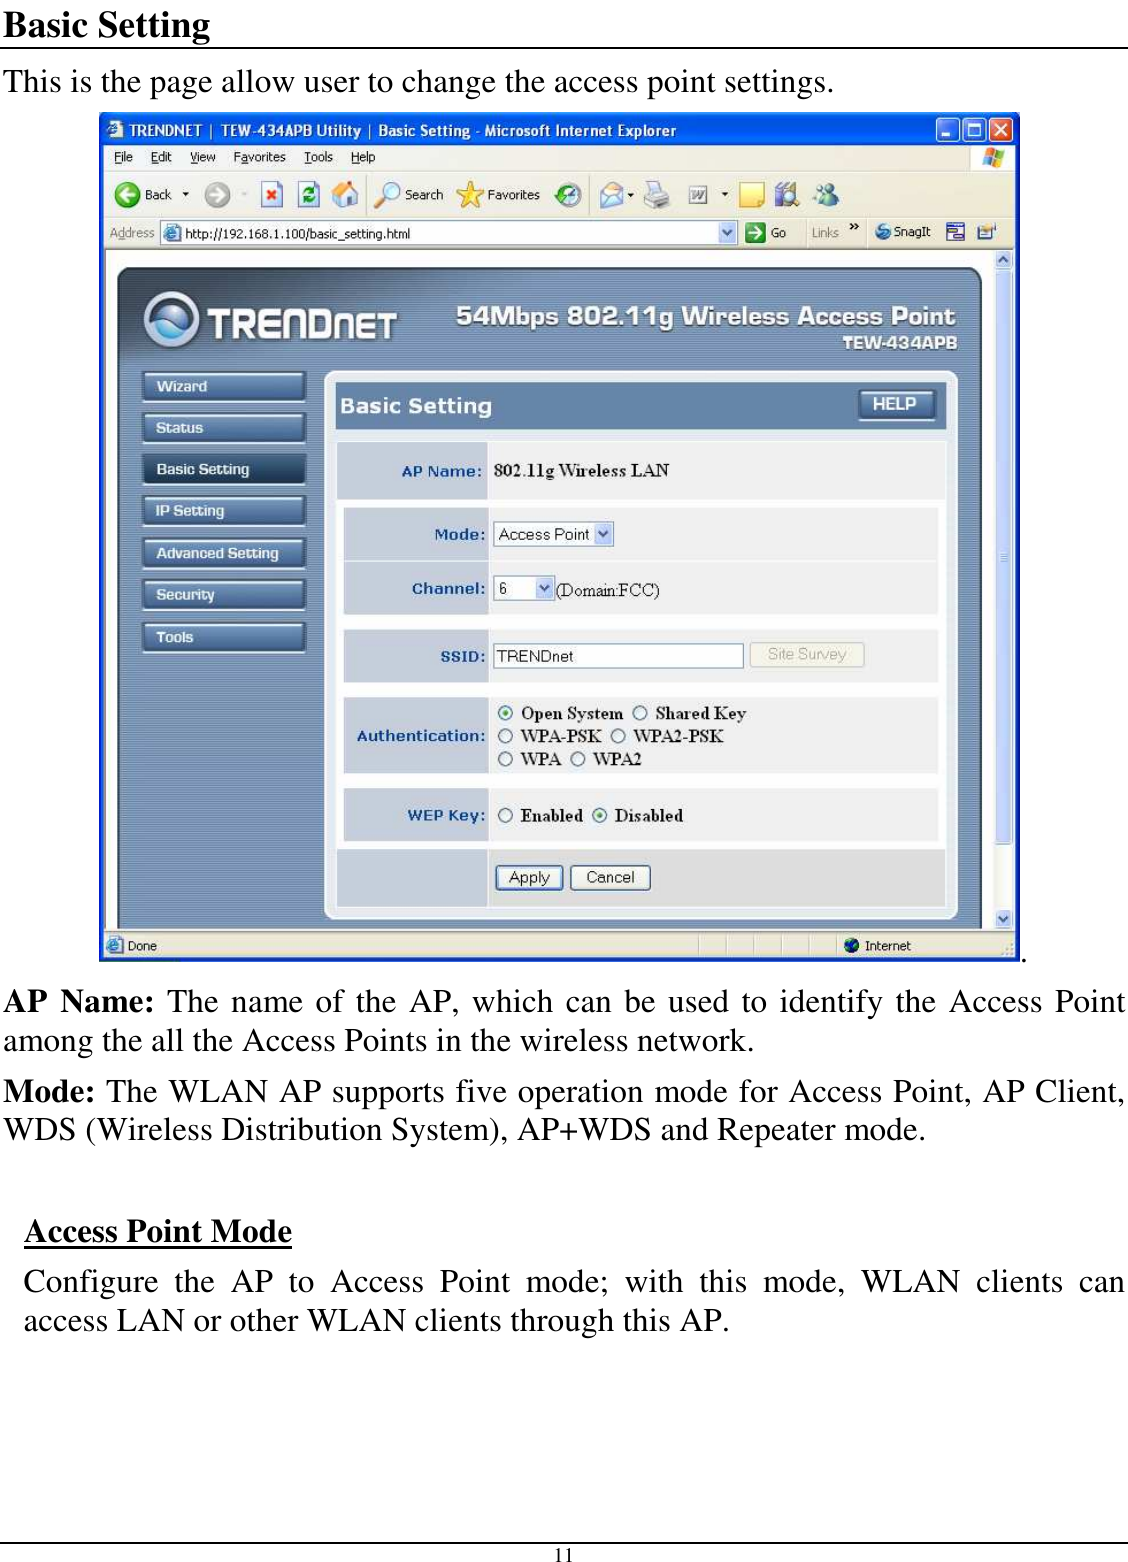  11 Basic Setting This is the page allow user to change the access point settings. . AP Name: The name of the AP, which can be used to identify the Access Point among the all the Access Points in the wireless network. Mode: The WLAN AP supports five operation mode for Access Point, AP Client, WDS (Wireless Distribution System), AP+WDS and Repeater mode.  Access Point Mode Configure  the  AP  to  Access  Point  mode;  with  this  mode,  WLAN  clients  can access LAN or other WLAN clients through this AP. 